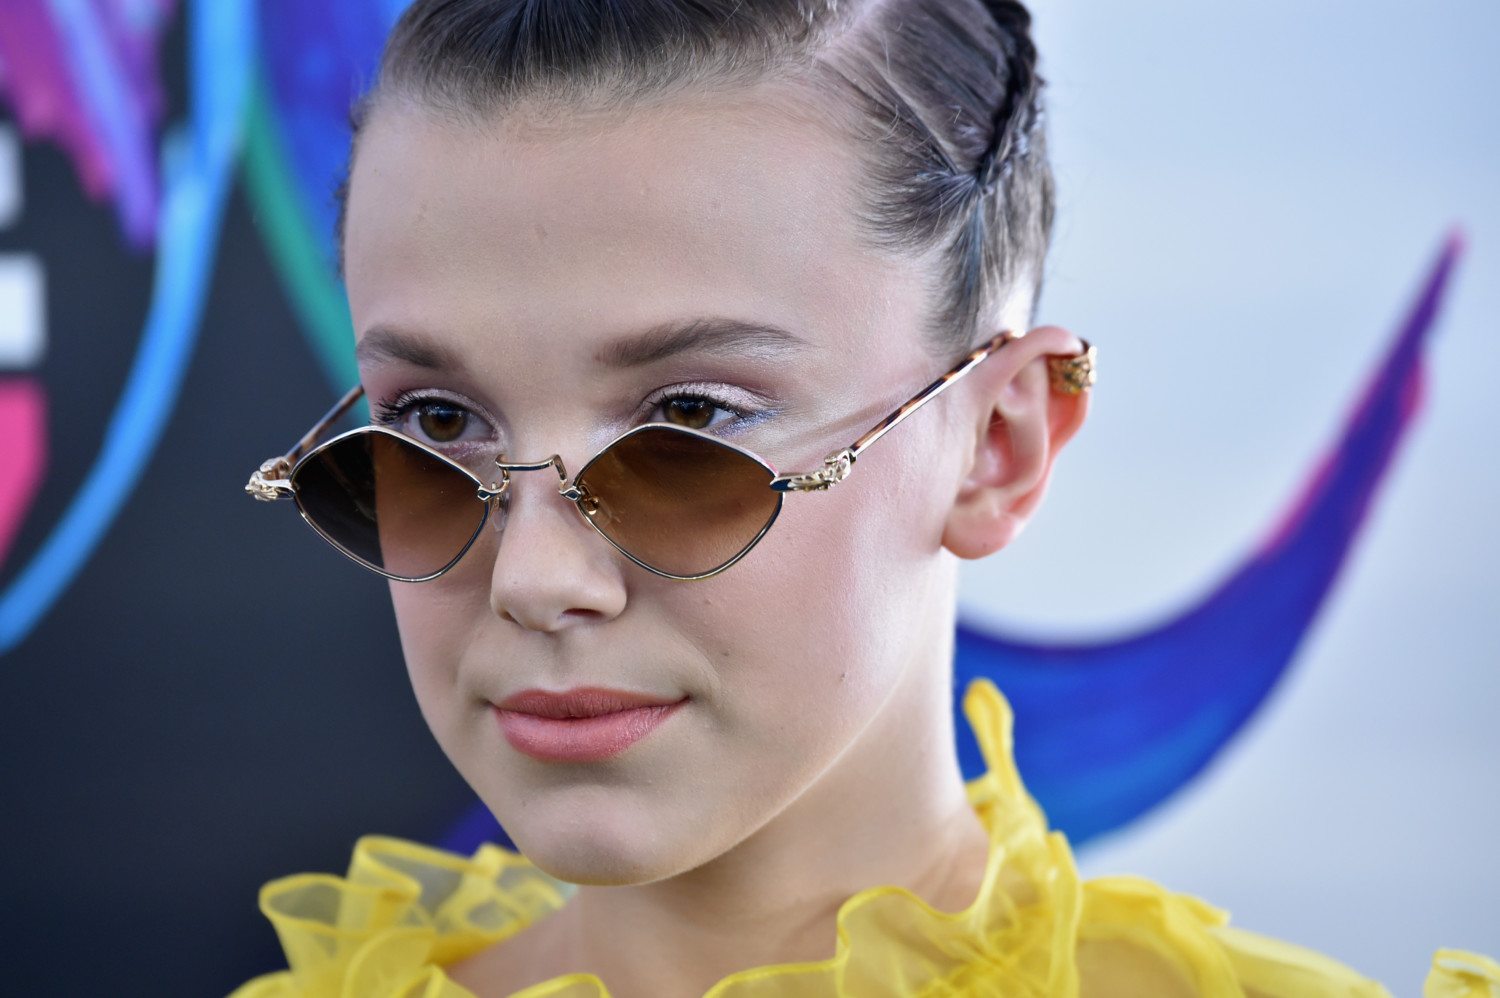 Stranger Things' Star Millie Bobby Brown Opens Up About Her Health Str...